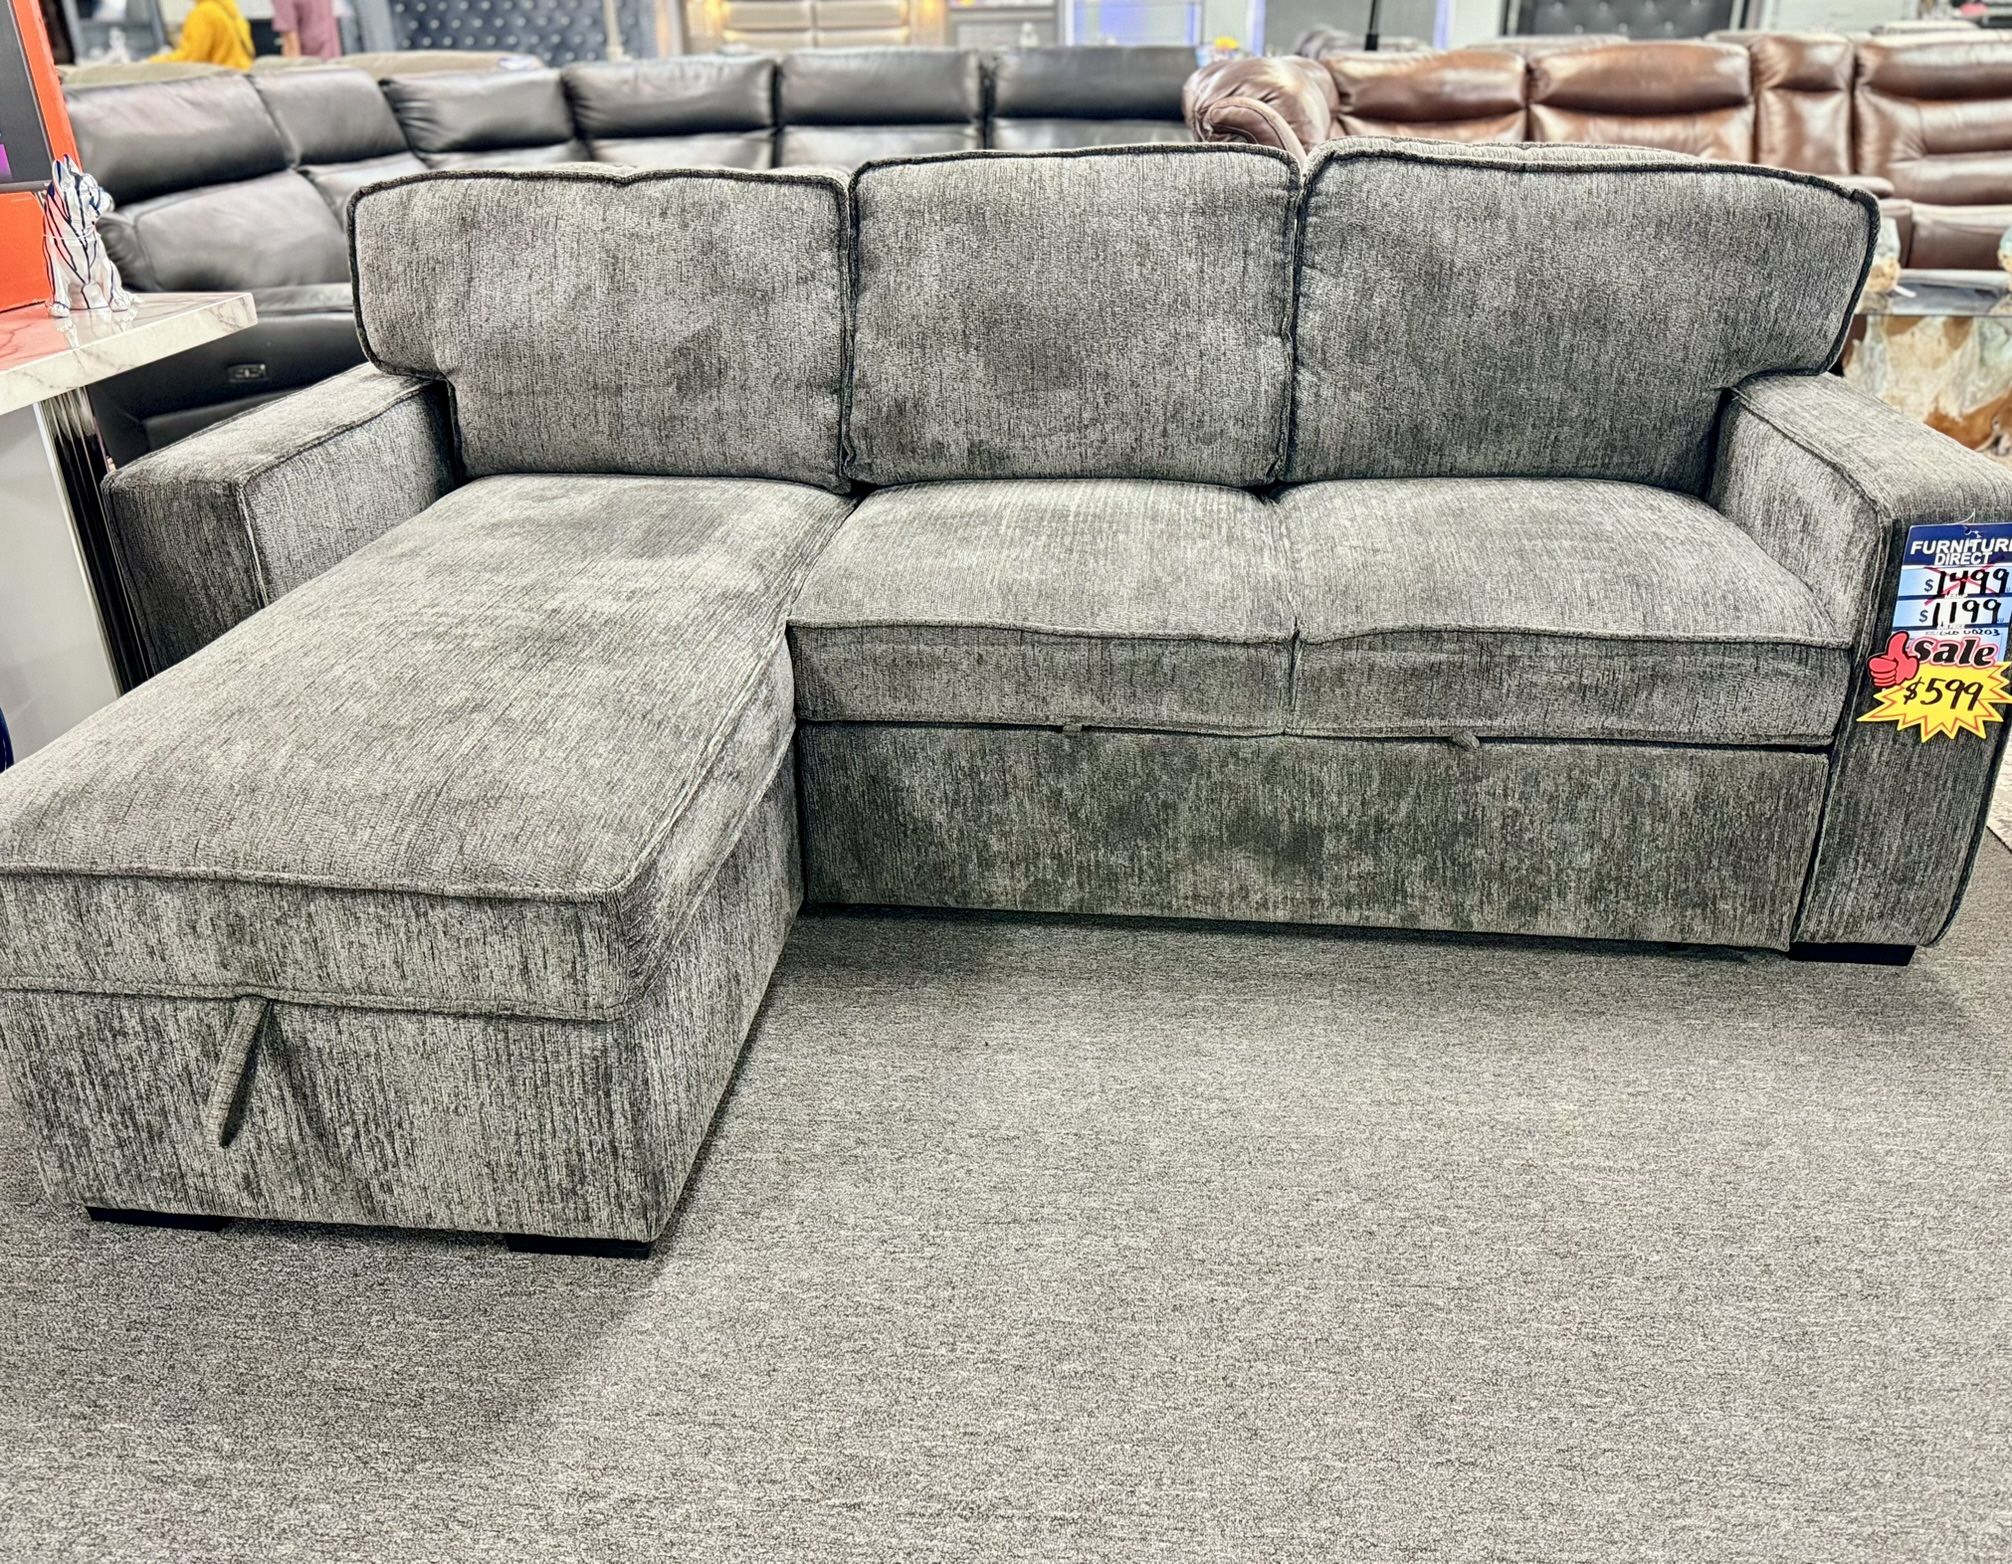 One Time Offer🚨Gorgeous Grey Pull Out Sleeper Furniture Sectional Available Limited Sale $599🚨